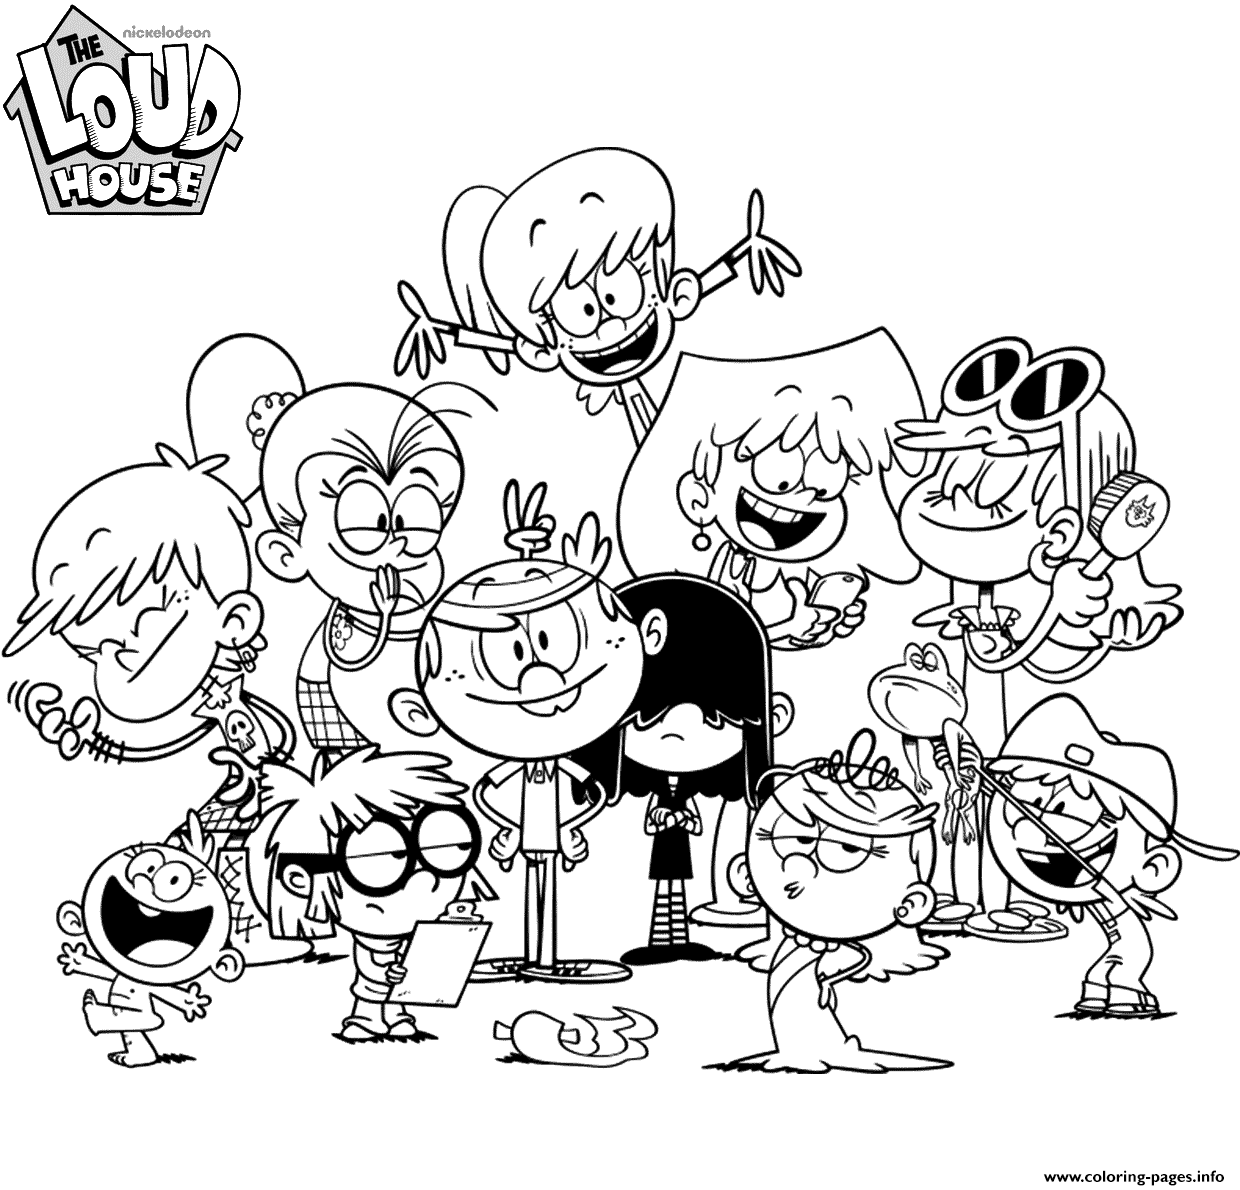 nickelodeon-the-loud-house-coloring-page-printable-the-loud-house-coloring-pages-to-download